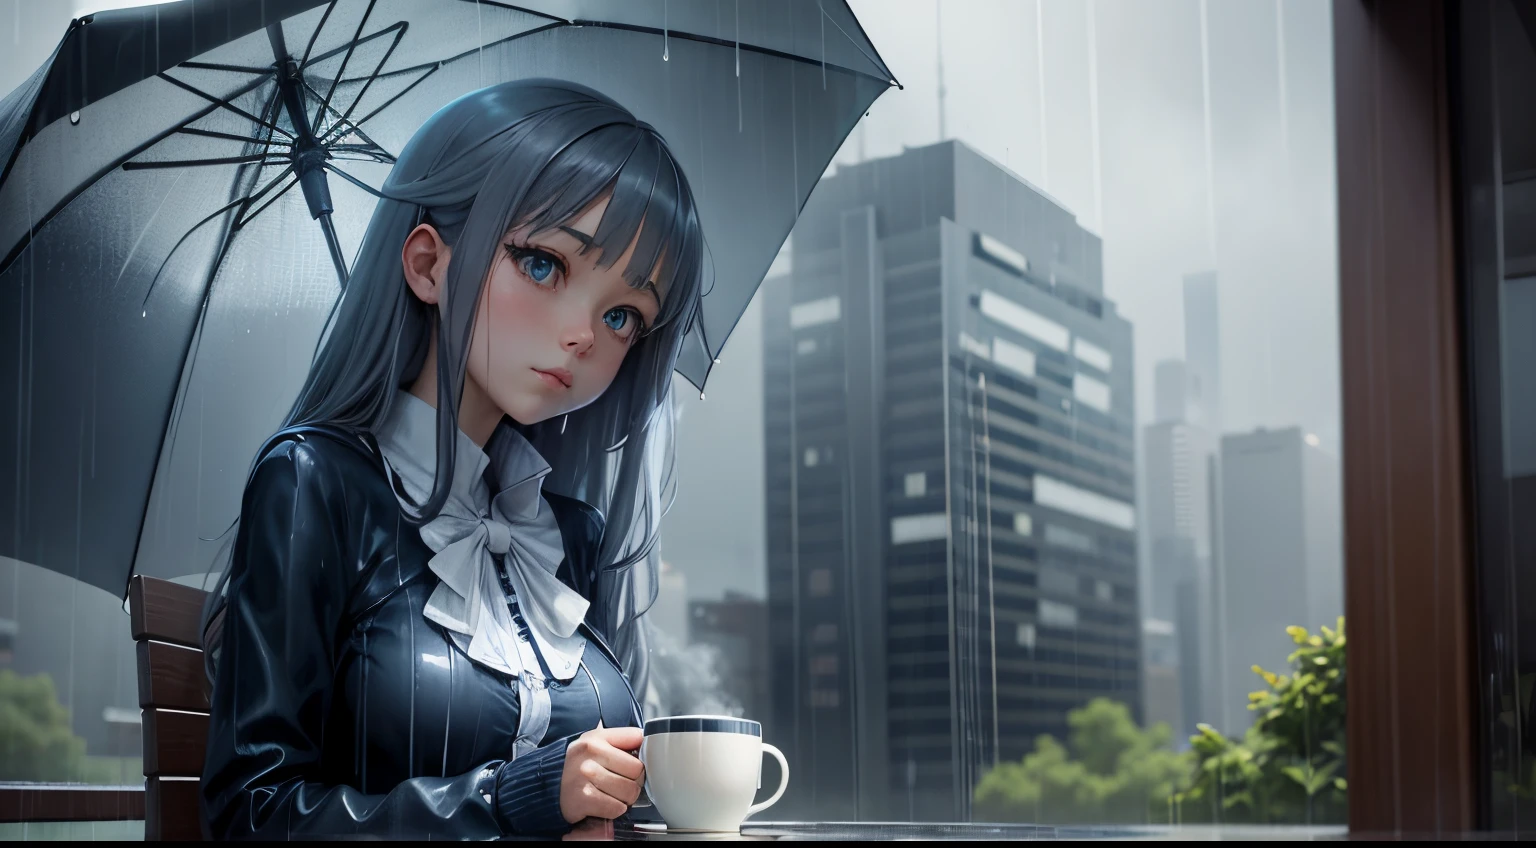 "Rainy Day Retreat": Anime girl with a cup of coffee and an umbrella in the rain, featuring cool blues and grays.